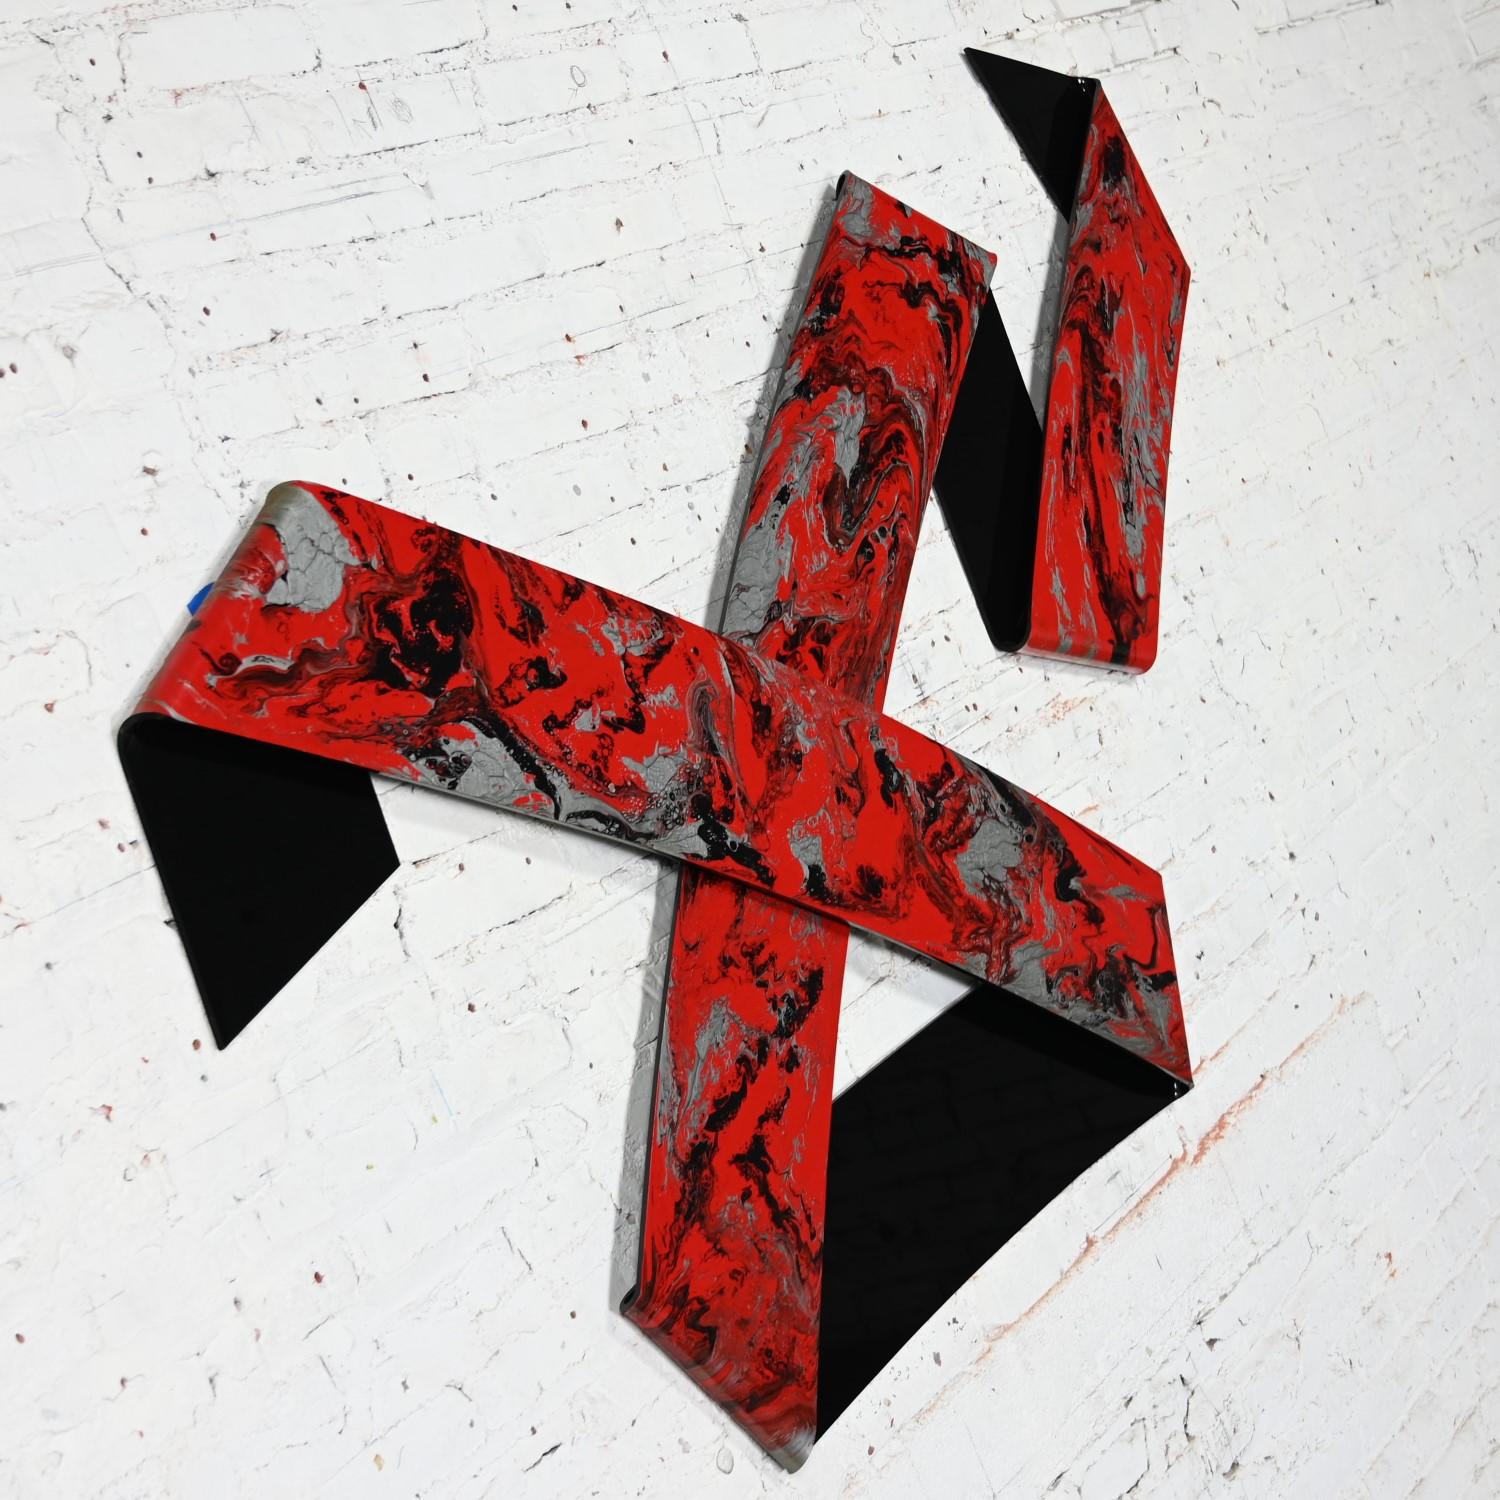 1990 Abstract Richard Mann Folded Plexiglass Ribbon Wall Sculpture Red Black  In Good Condition For Sale In Topeka, KS